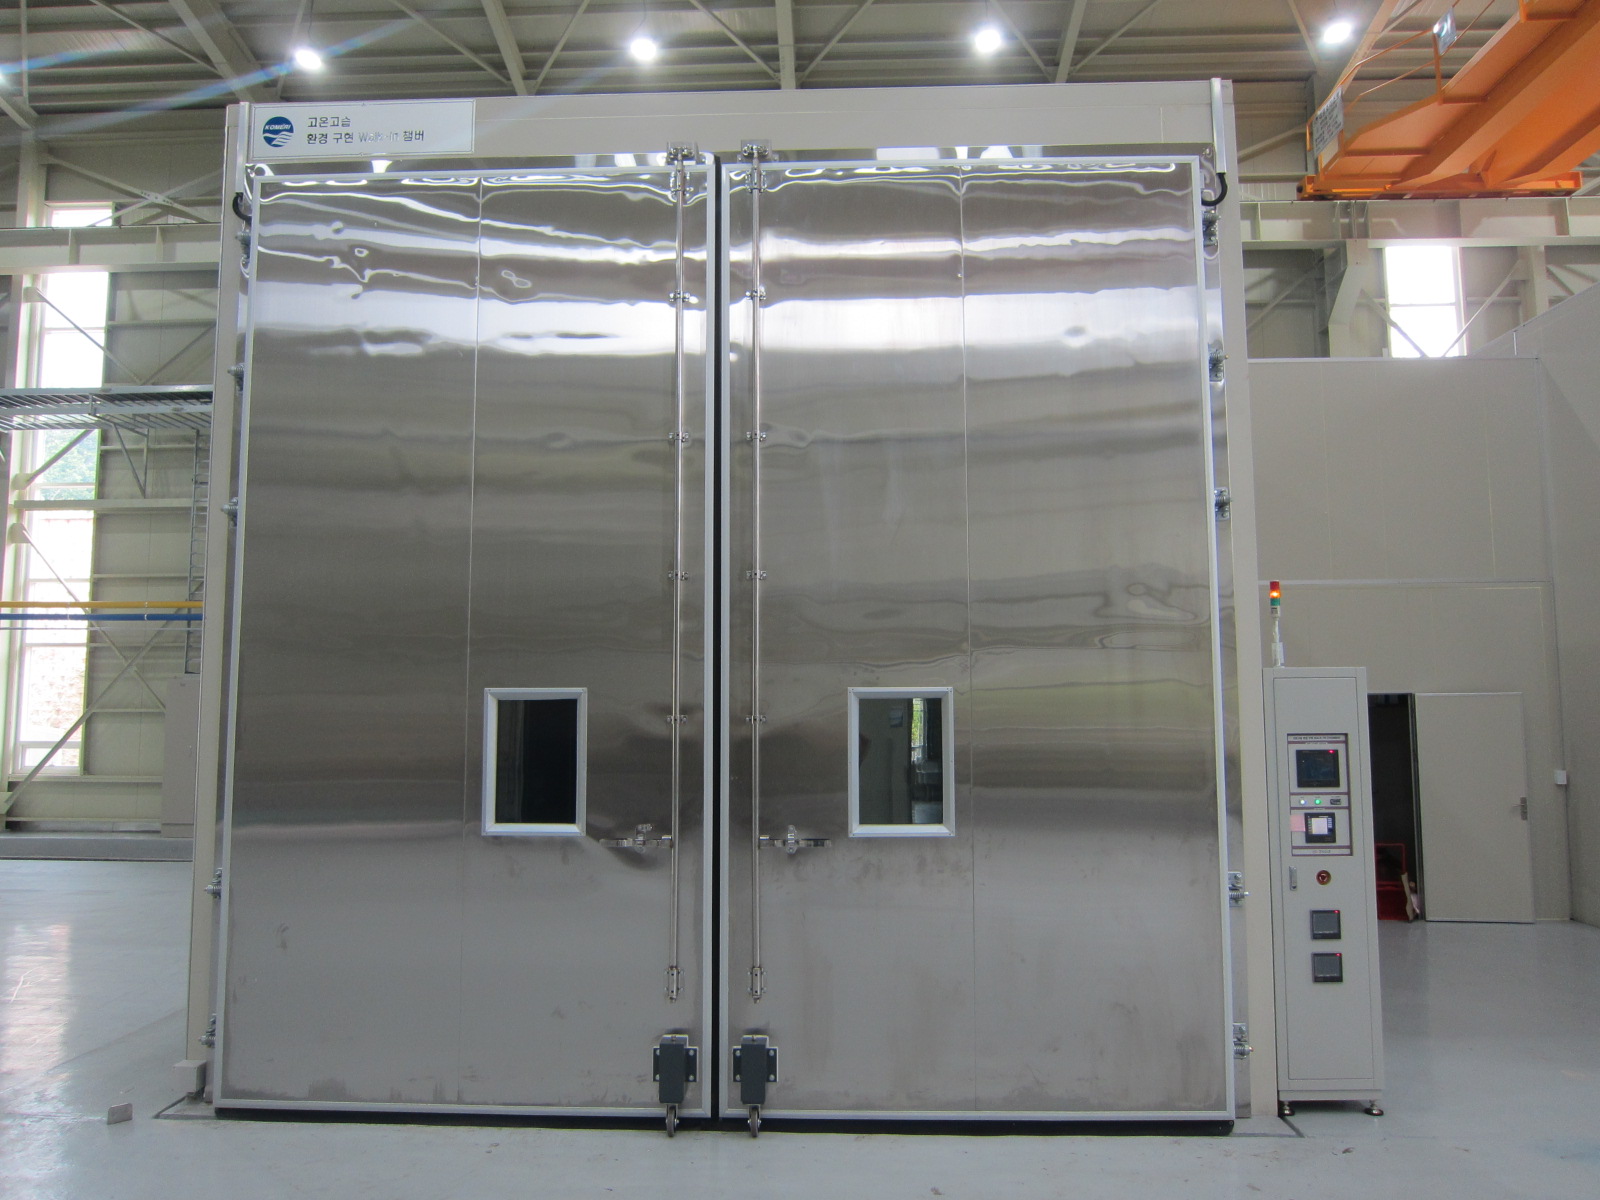 Walk-in chamber for high temperature and high humidity environment